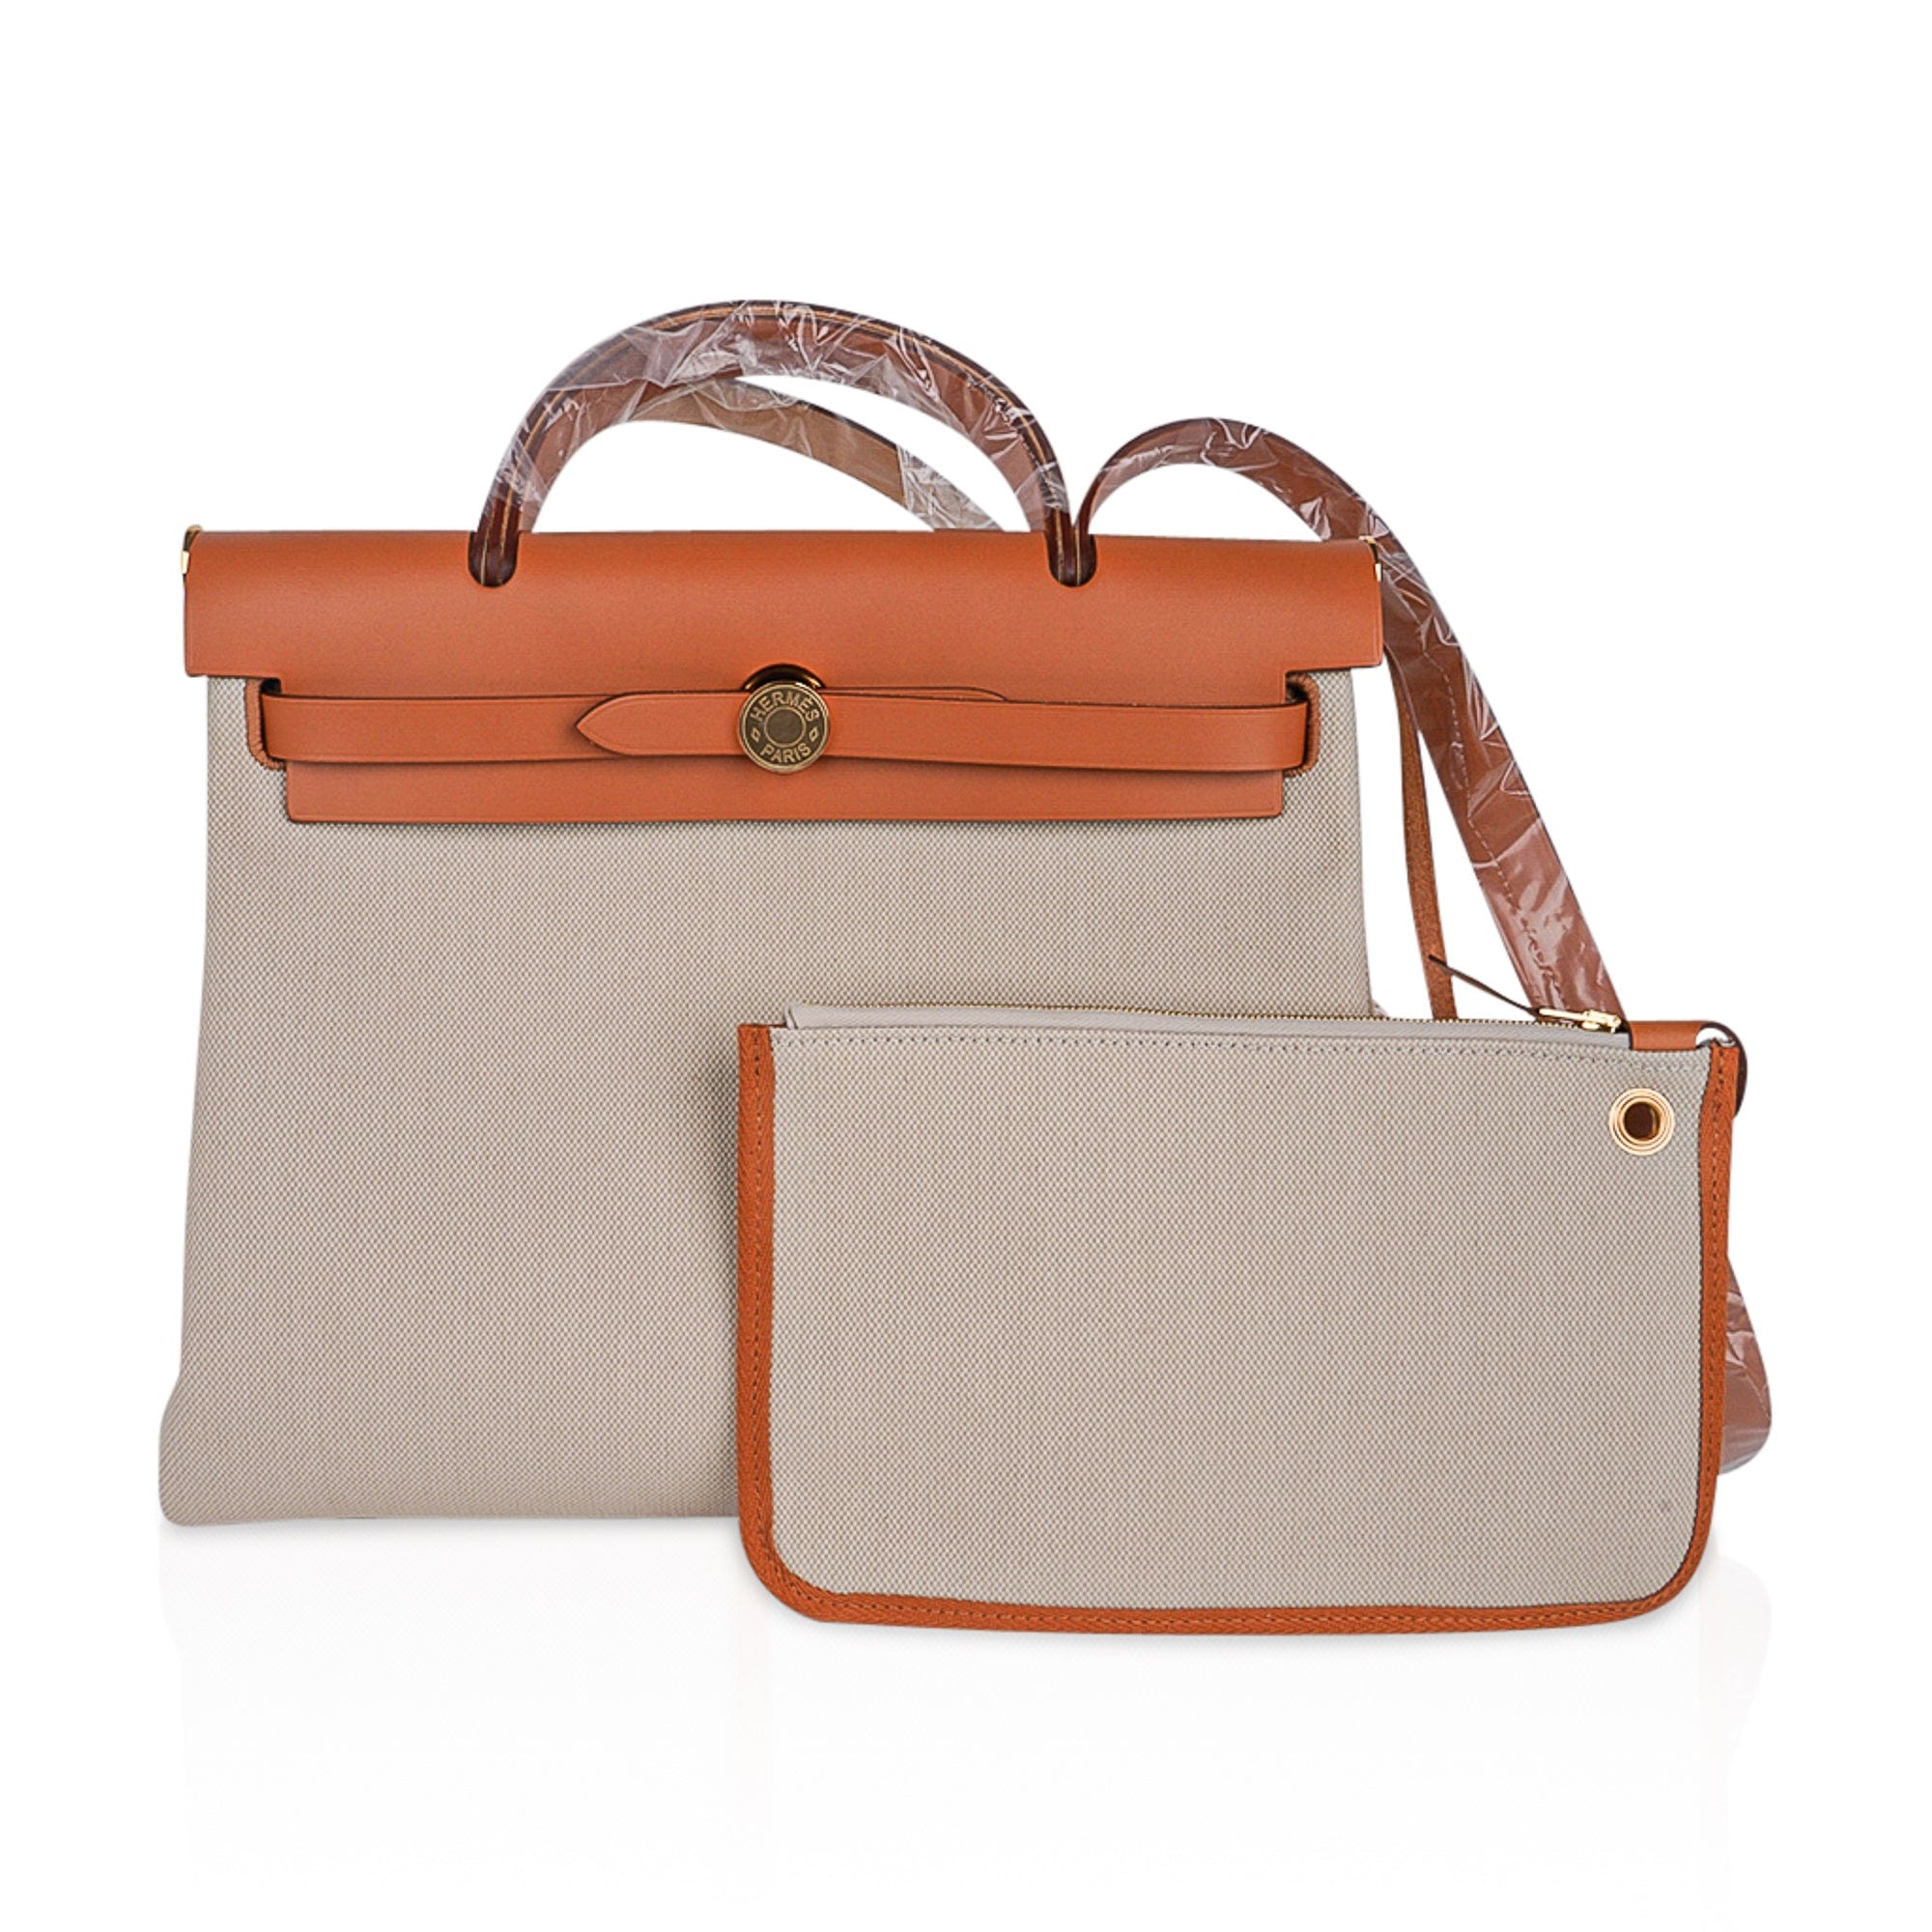 Hermes Canvas and Leather Herbag Zip 31cm Bag